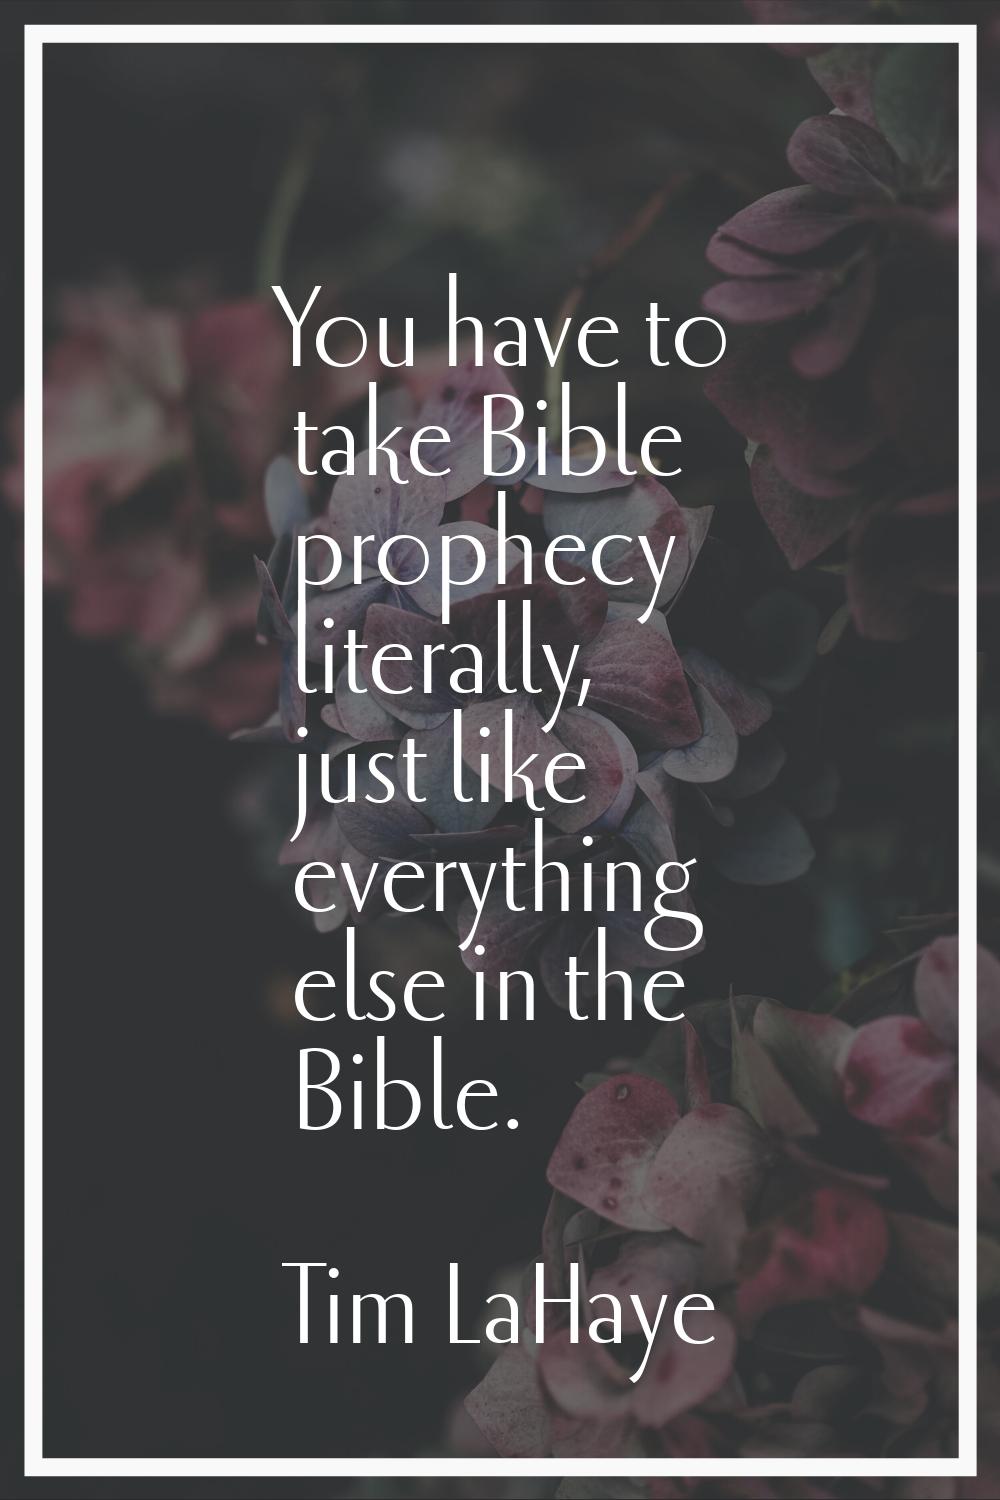 You have to take Bible prophecy literally, just like everything else in the Bible.